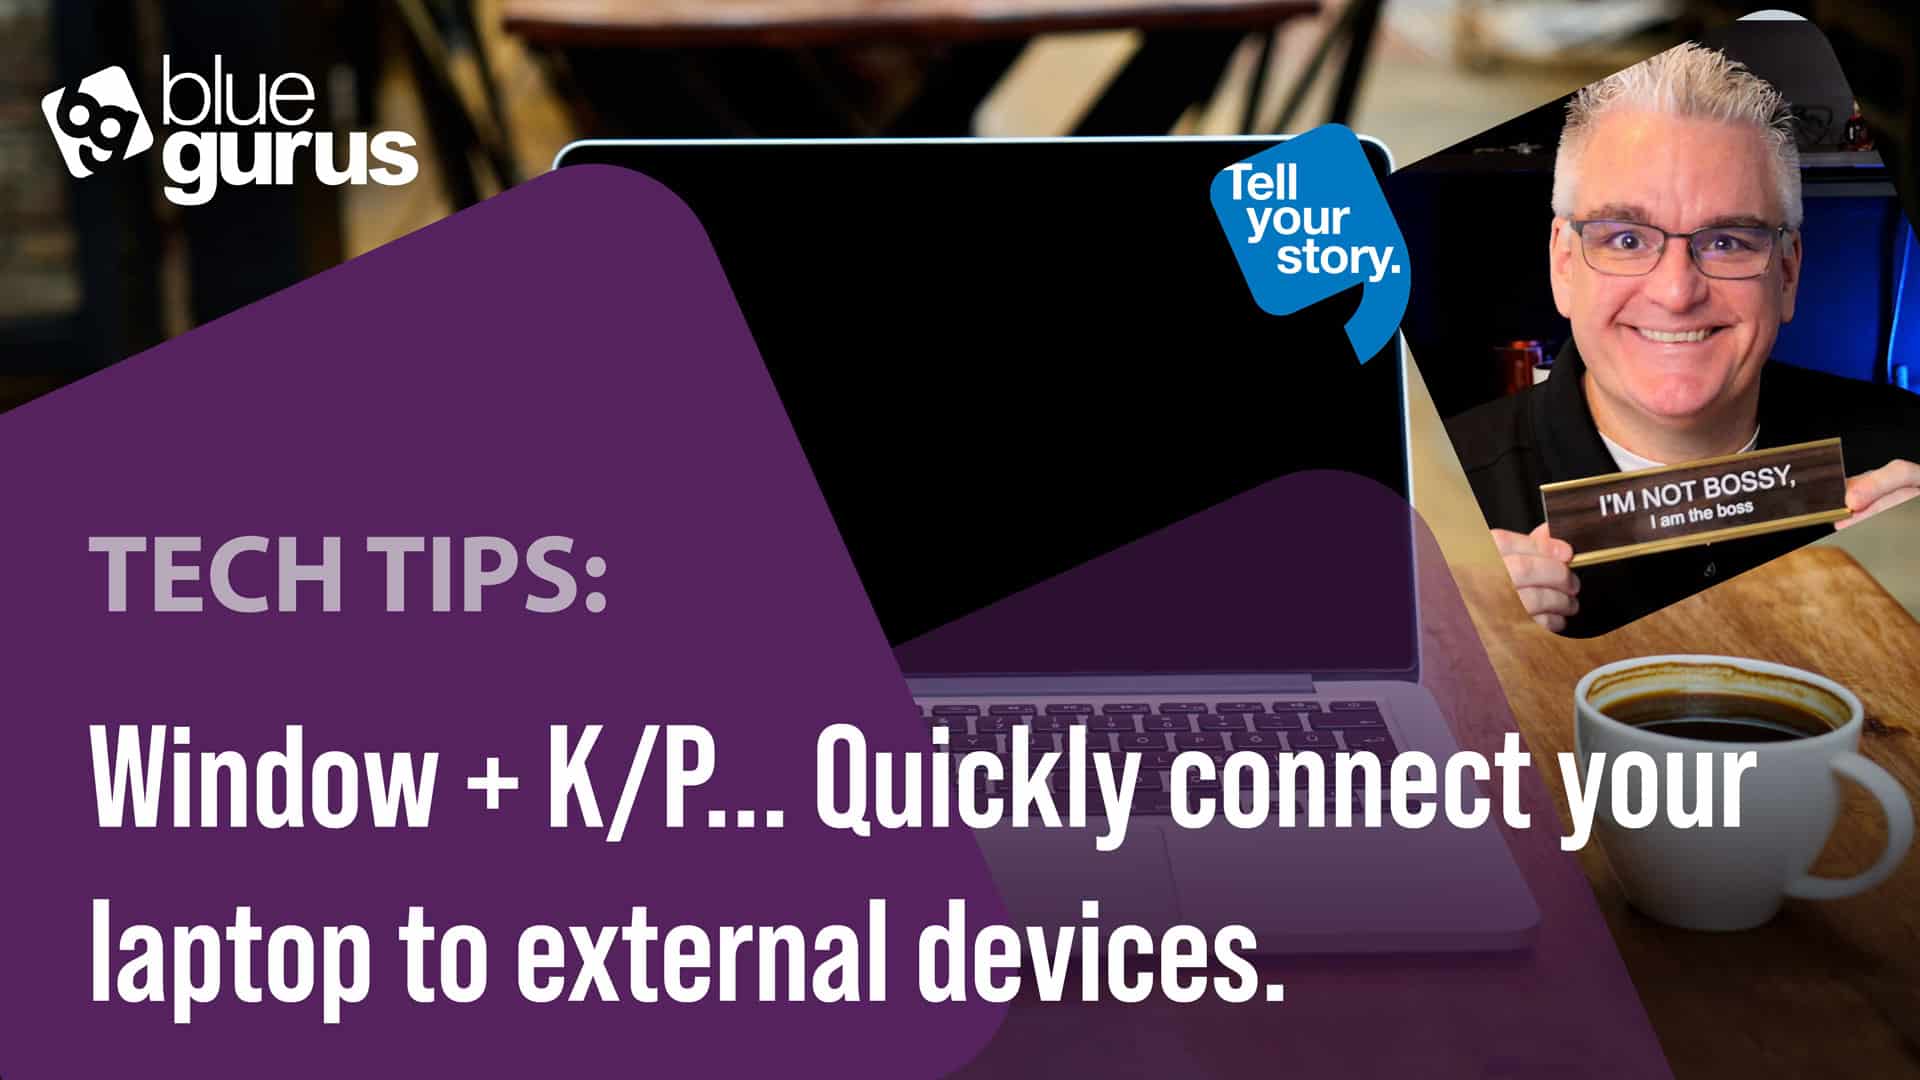 Window + K/P... Quickly connect your laptop to external devices.